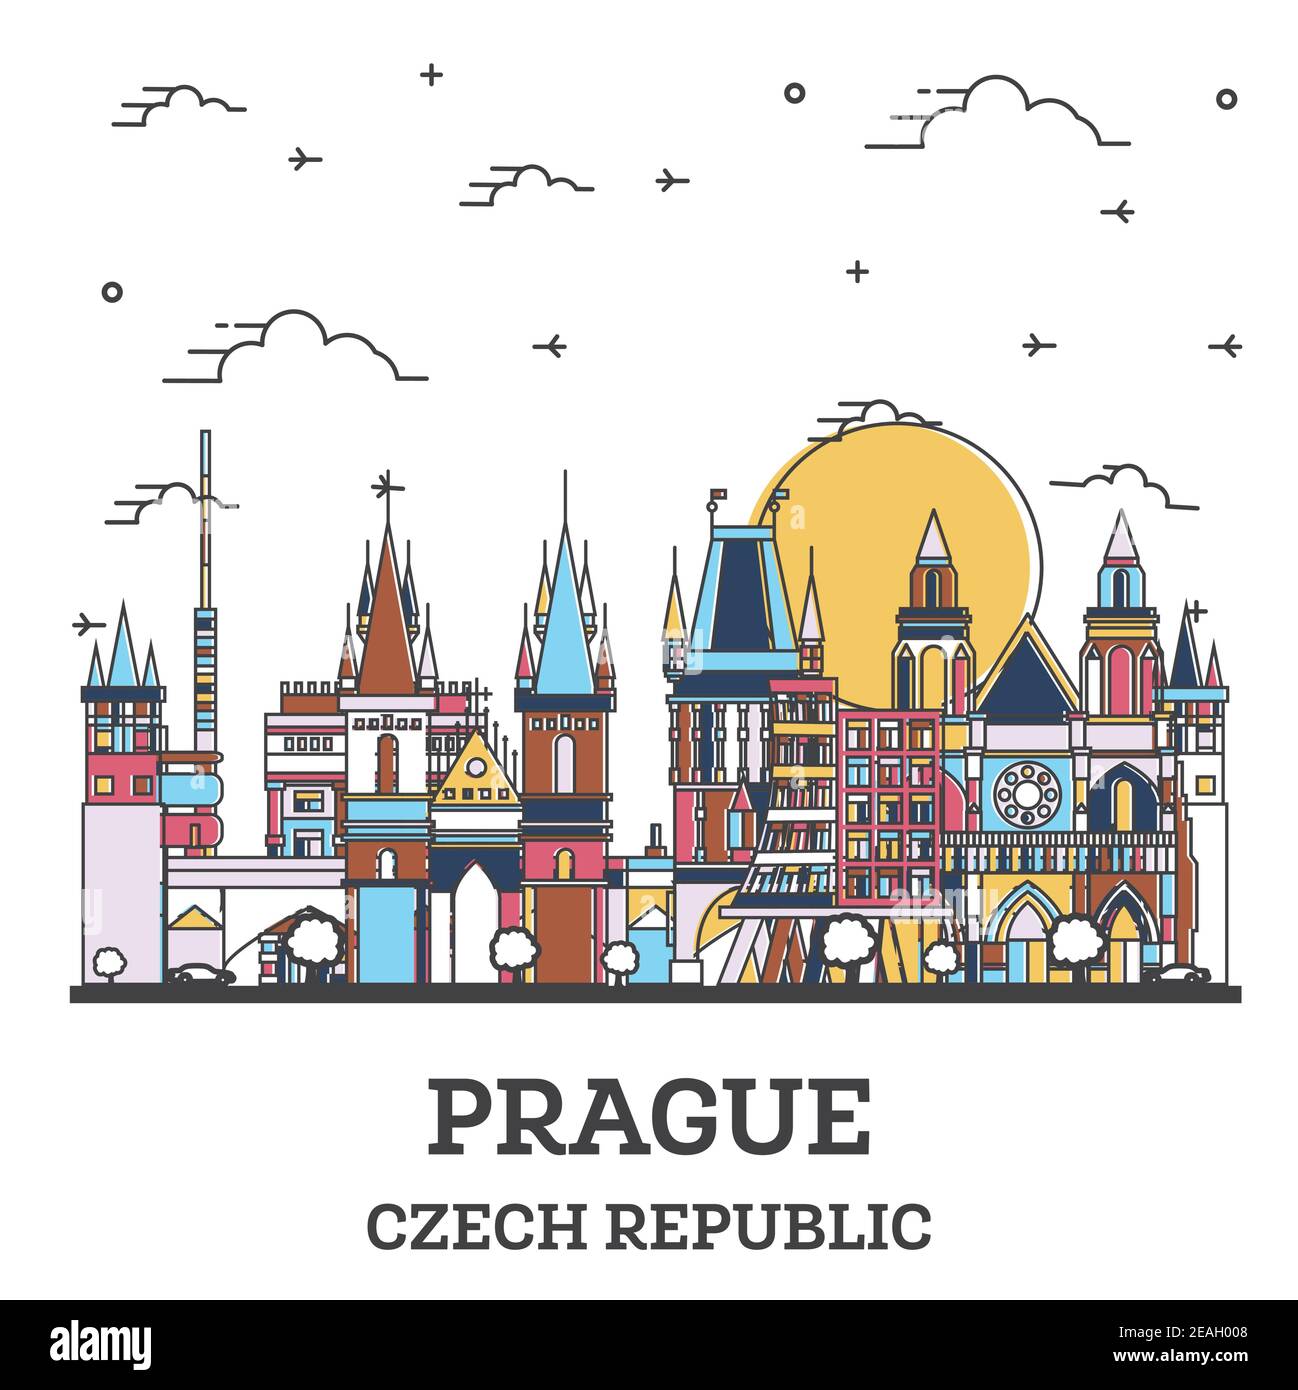 Outline Prague Czech Republic City Skyline with Colored Historic Buildings Isolated on White. Vector Illustration. Prague Cityscape with Landmarks. Stock Vector